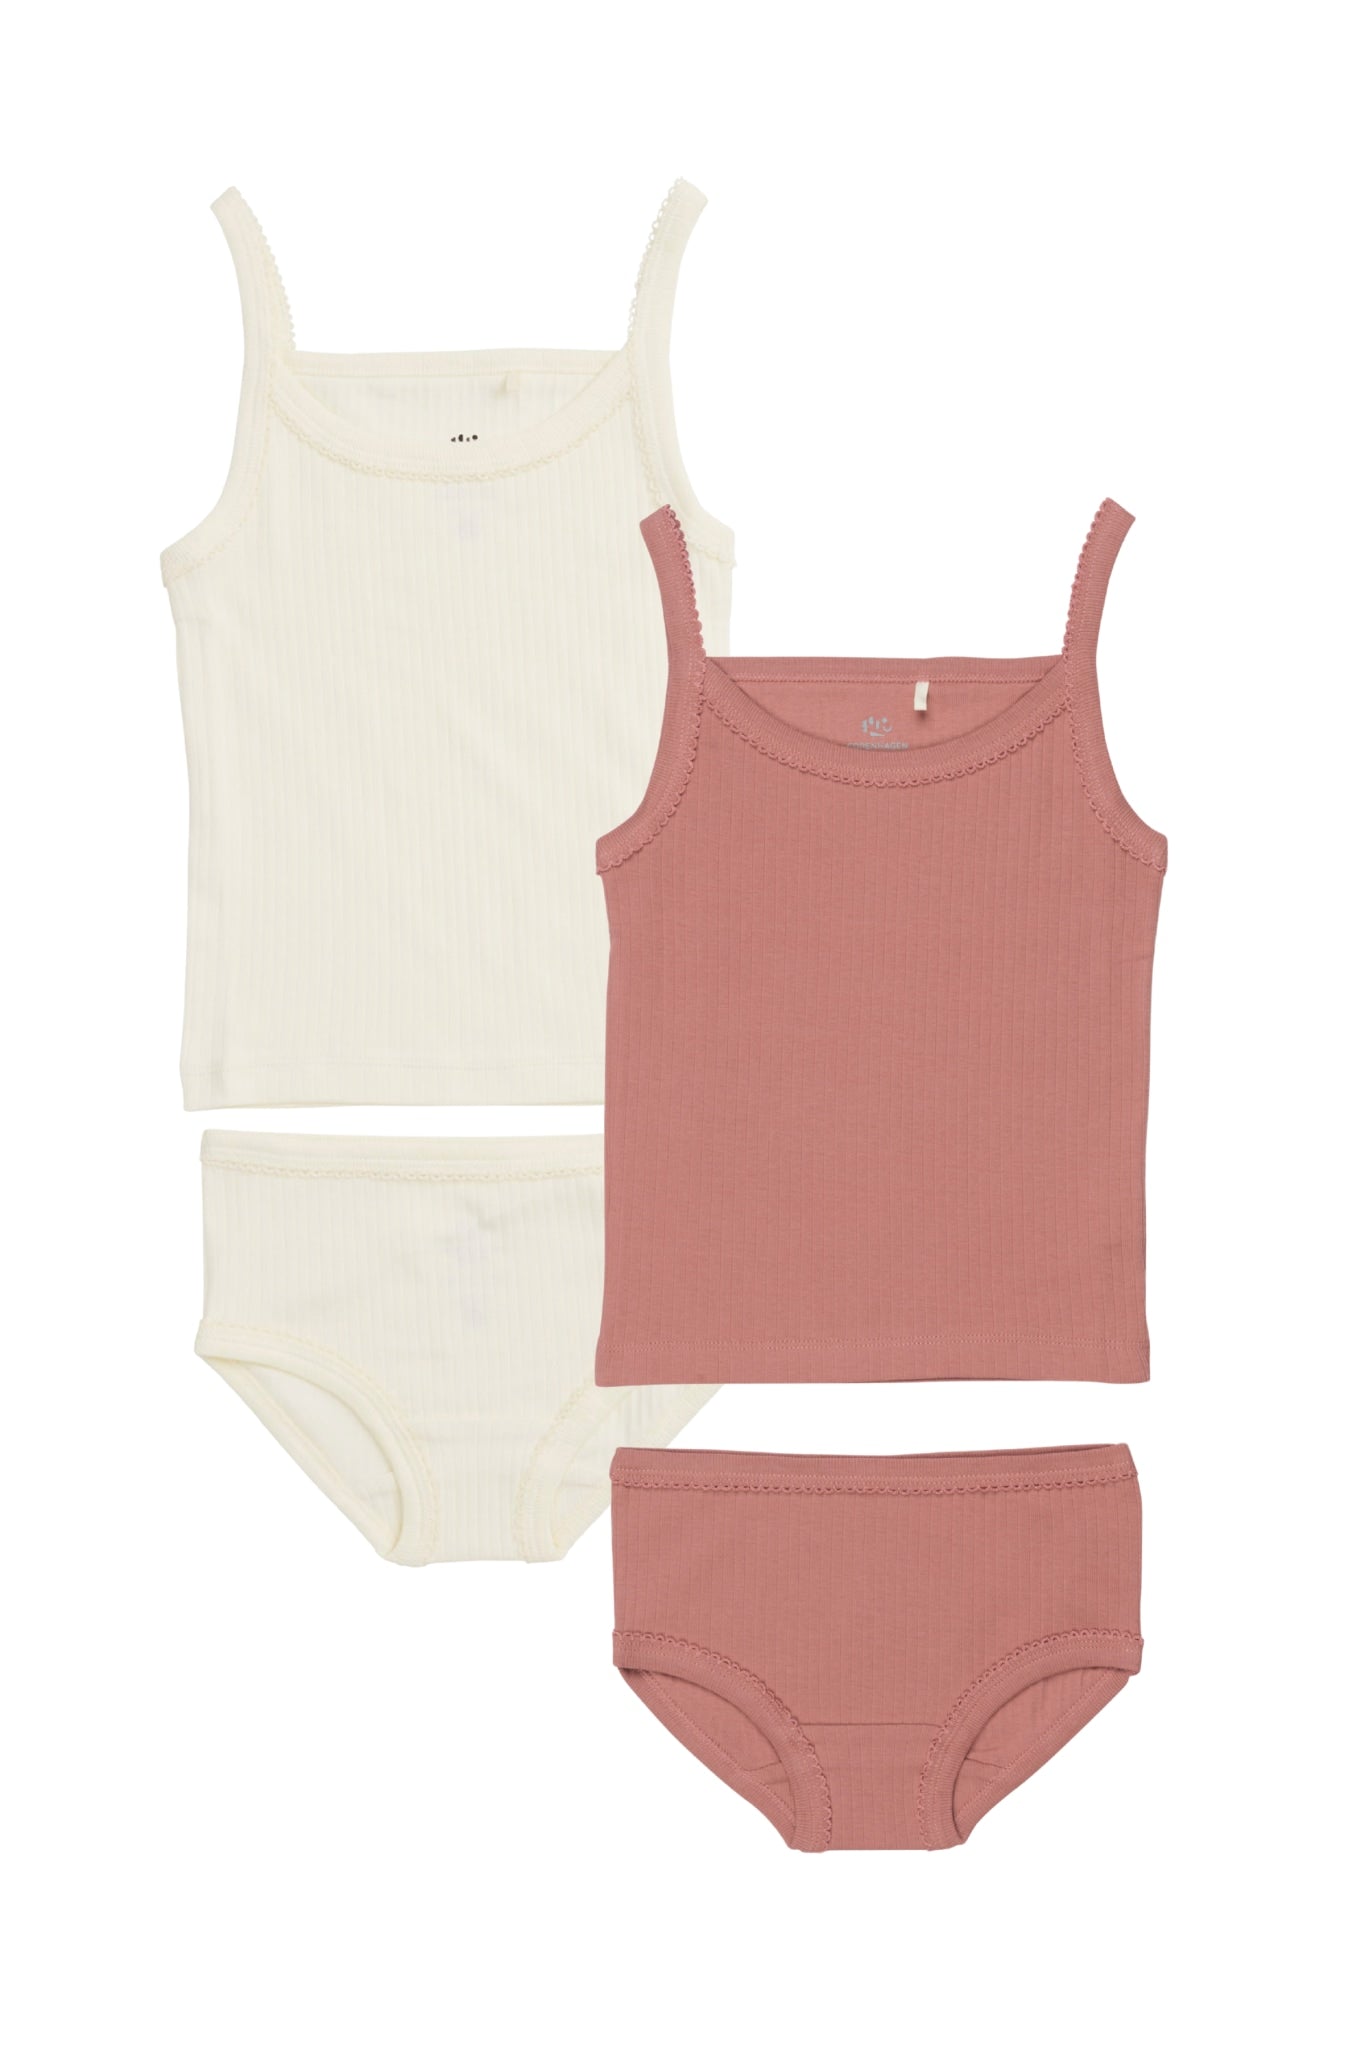 RIB JERSEY 2PACK STRAPTOP AND UNDERPANTS - CREAM/ OLD ROSE COMB.